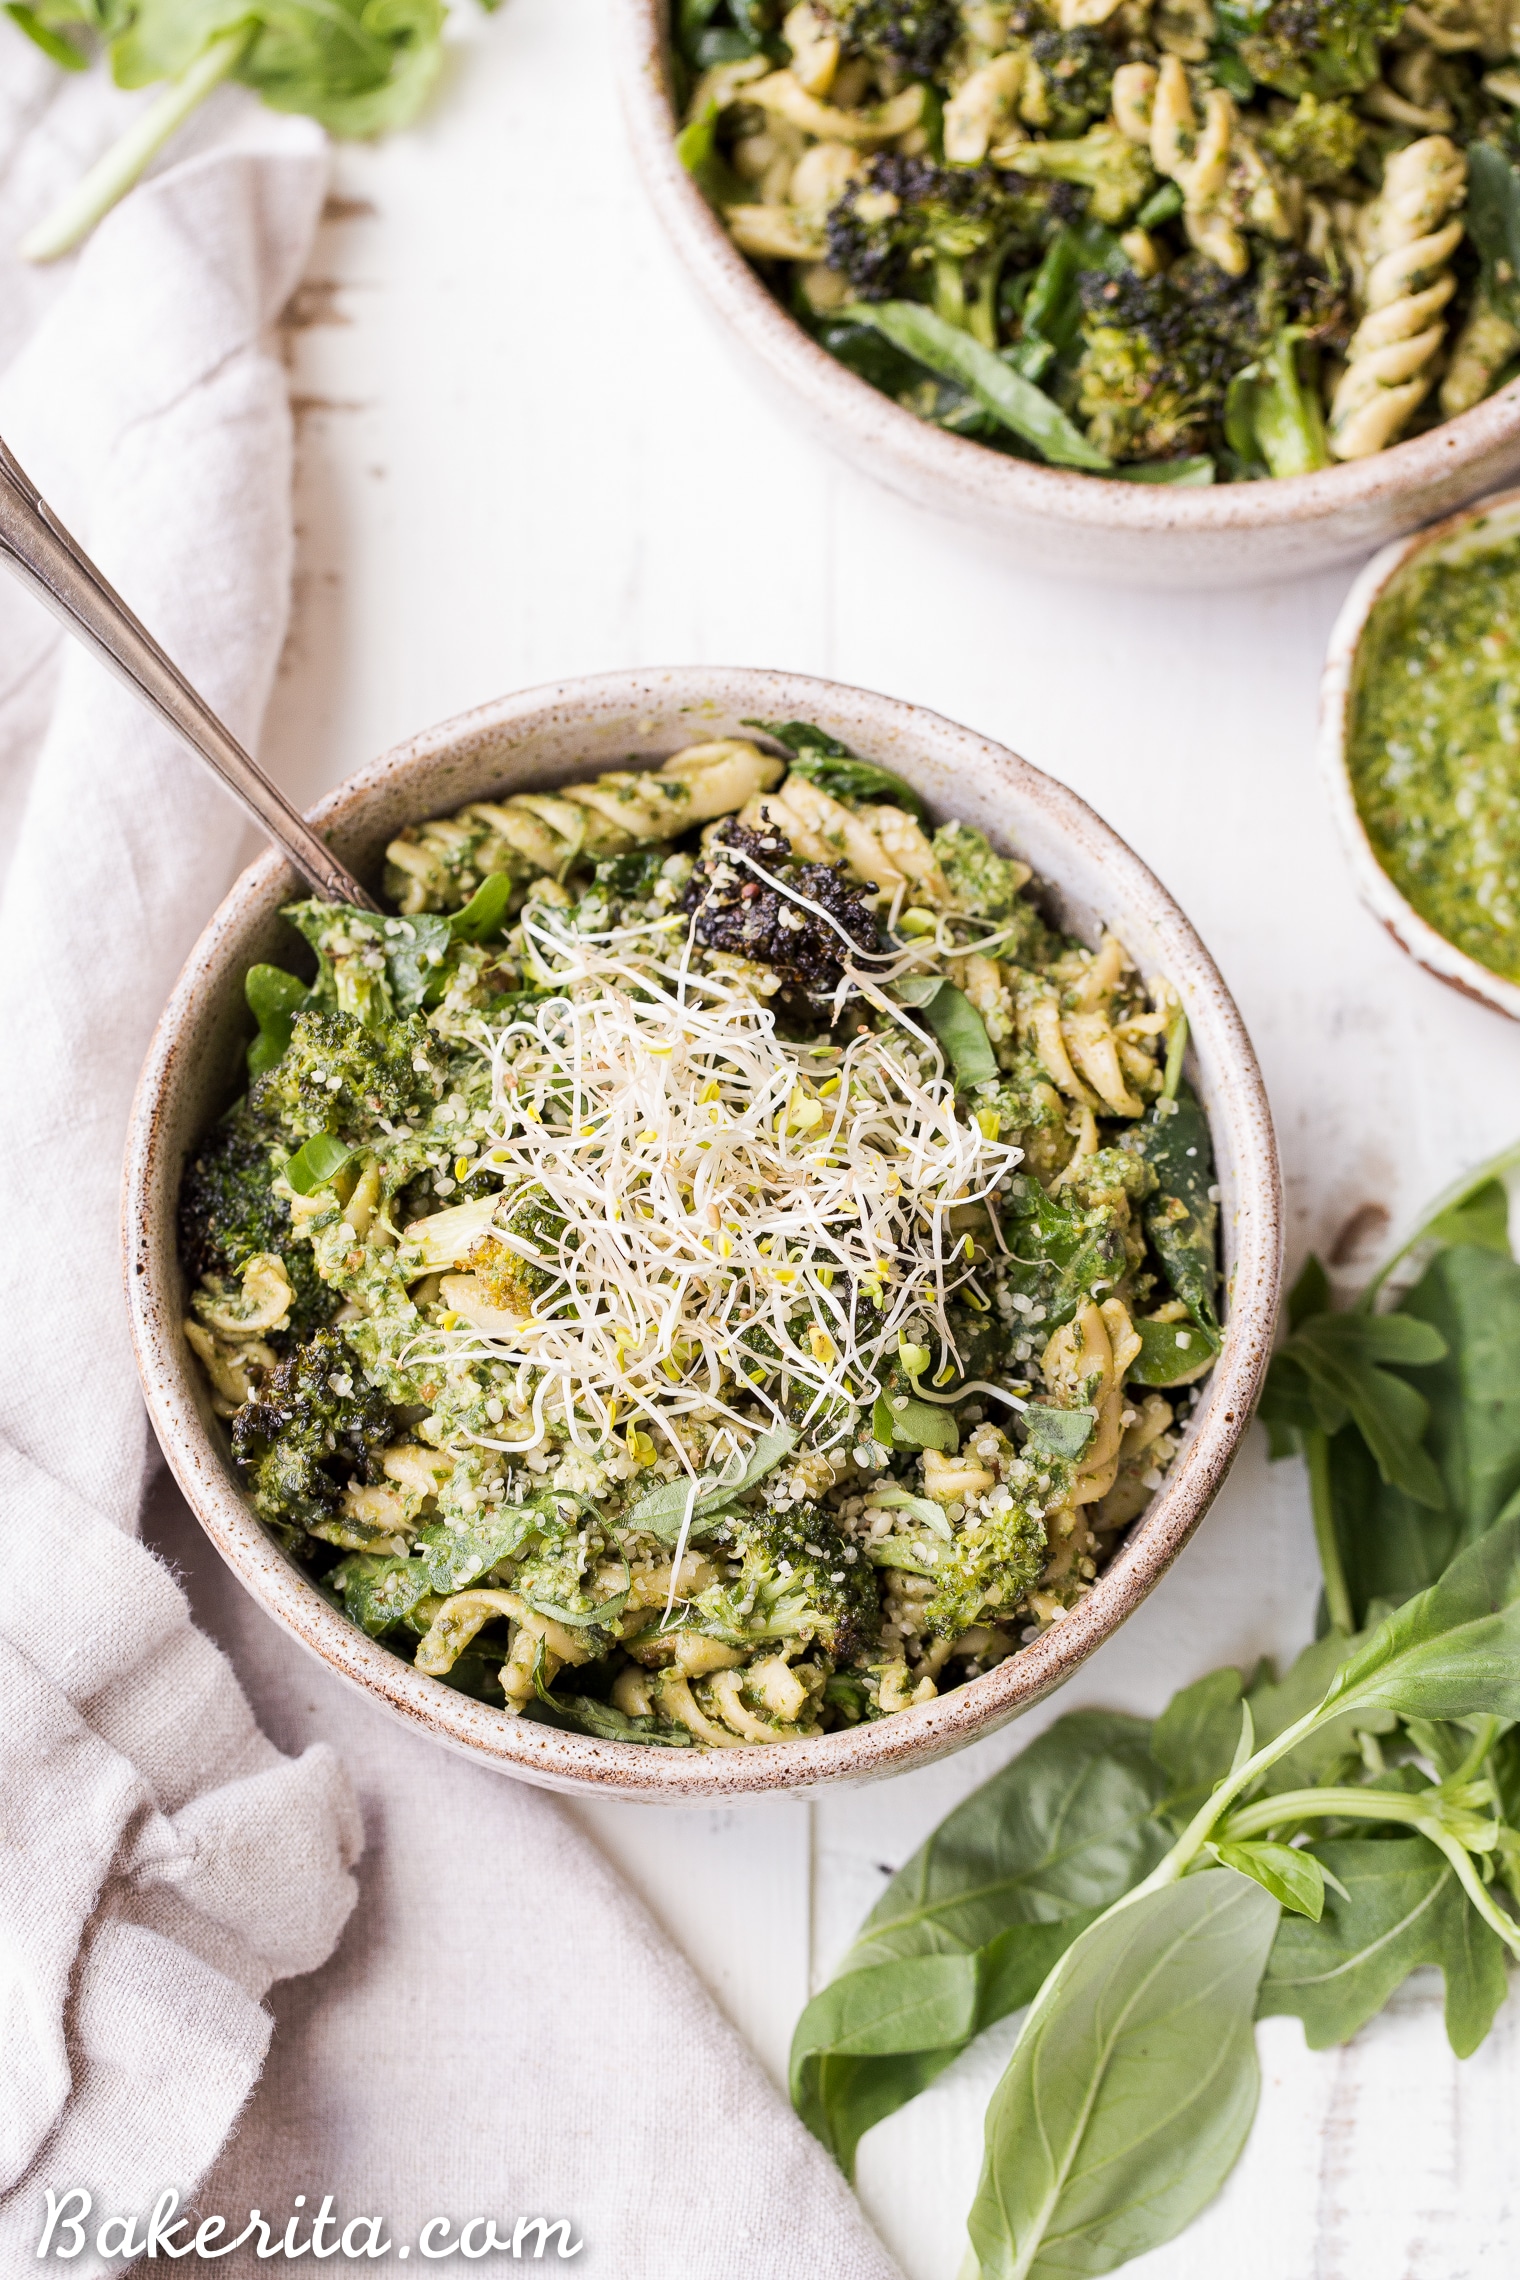 This Arugula Pesto Pasta Bowl with Broccoli is one of my favorite quick and easy go-to meals! It's filling, nutritious, and simple to make in just 30 minutes. You're going to want to put the homemade dairy-free arugula pesto on everything!